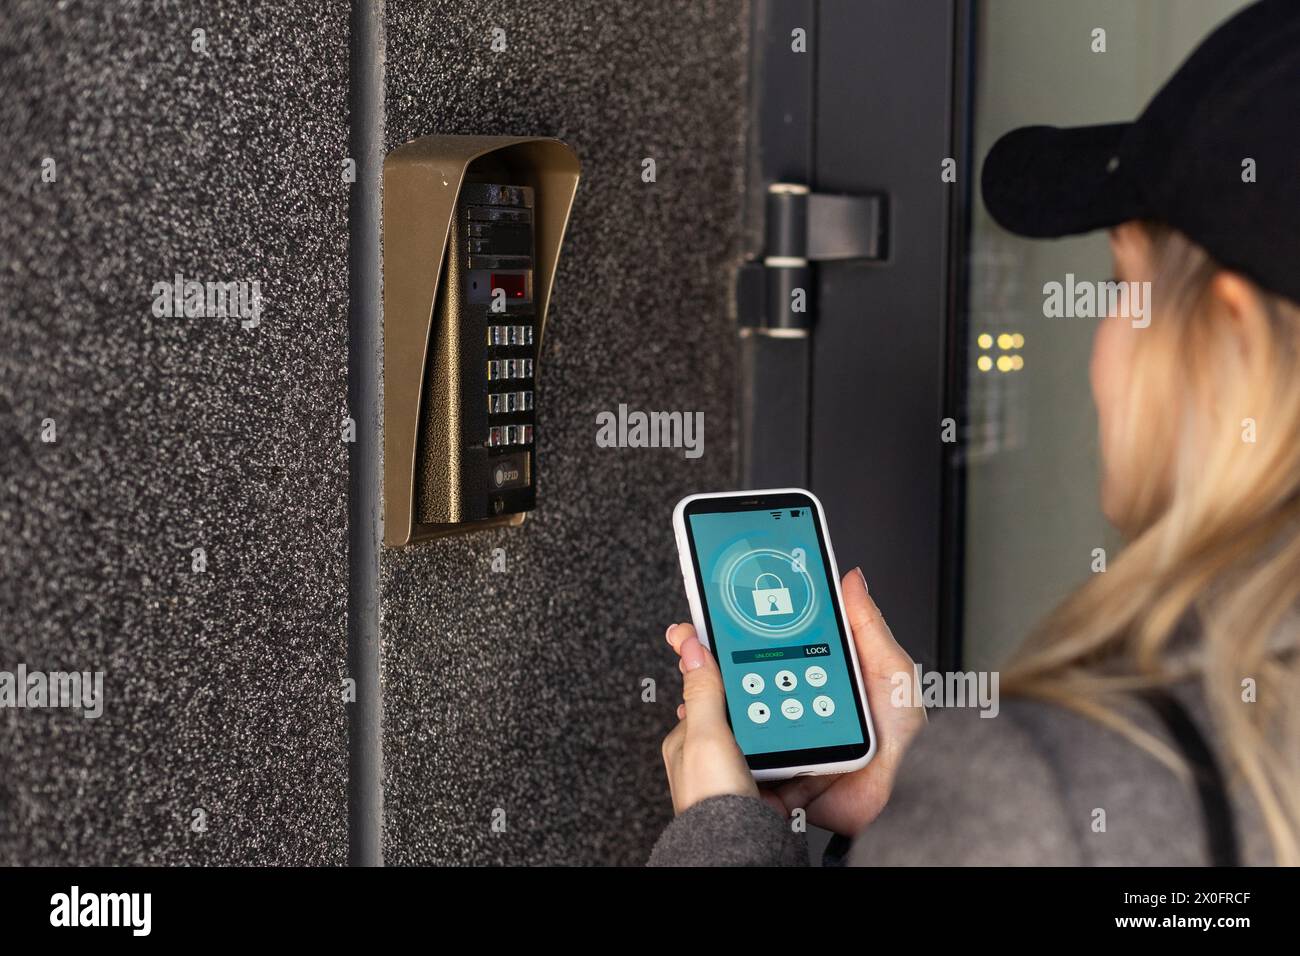 Woman locking smartlock on the entrance door using a smart phone. Concept of using smart electronic locks with keyless access. Stock Photo